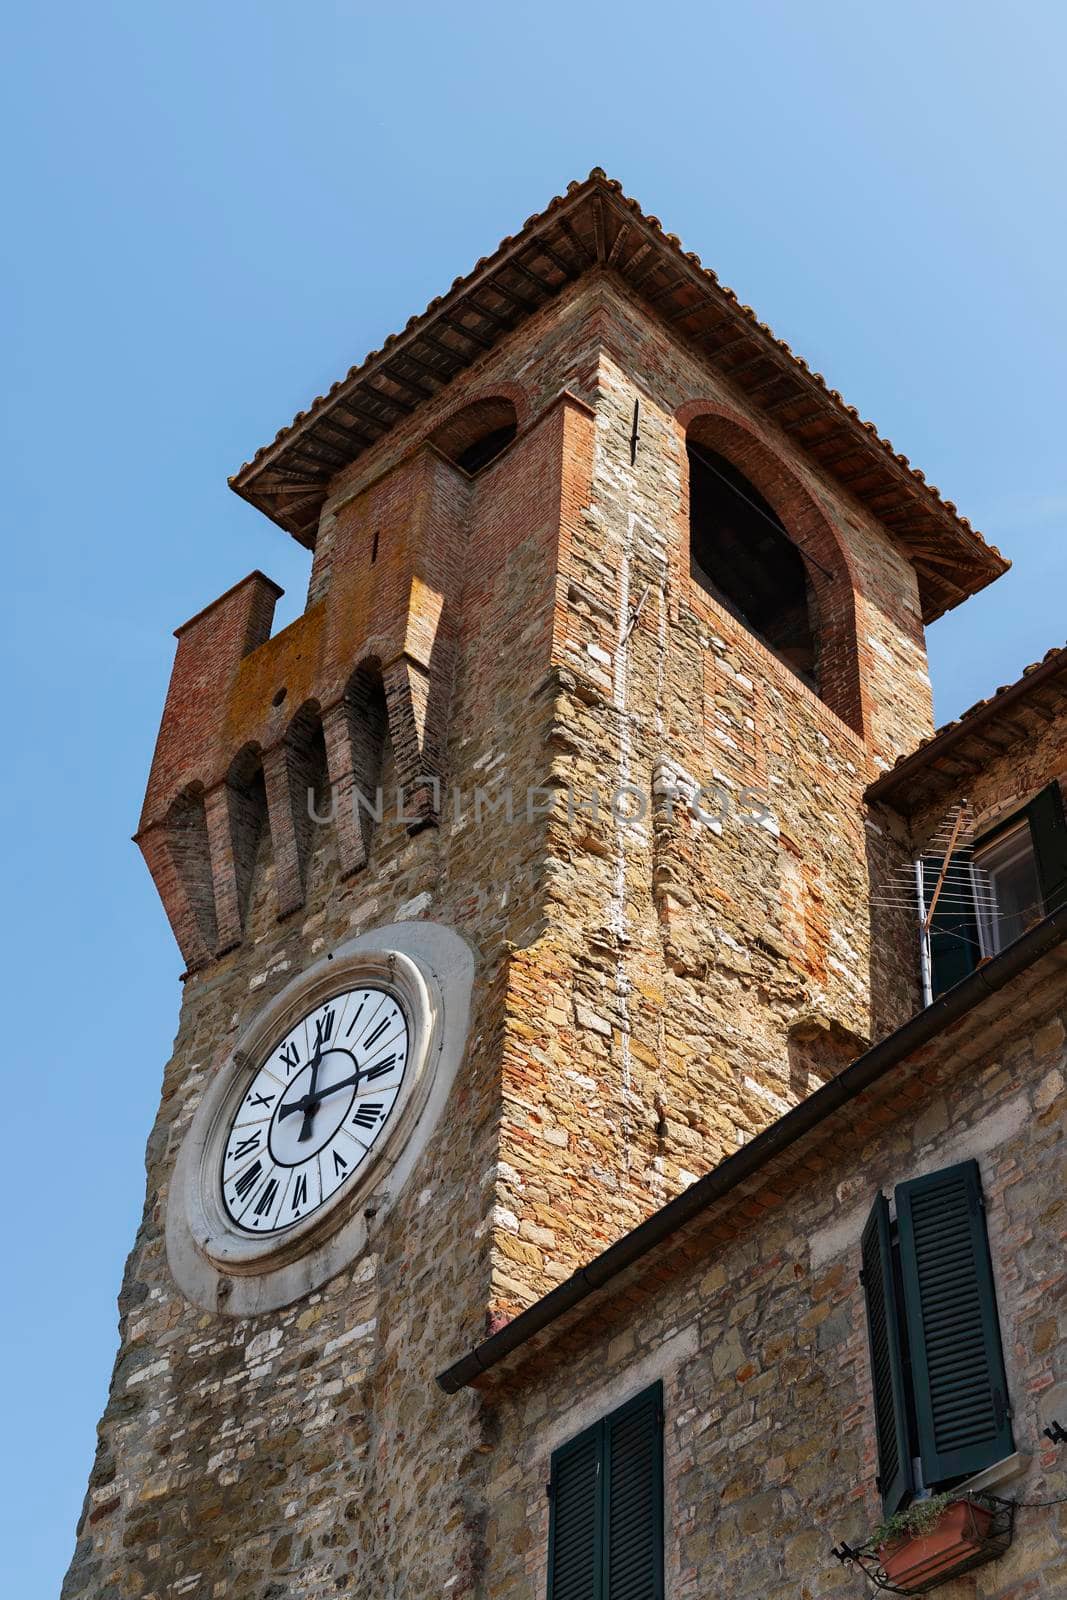 Old clock tower in Passignano sul Trasimeno ,Italy by victimewalker